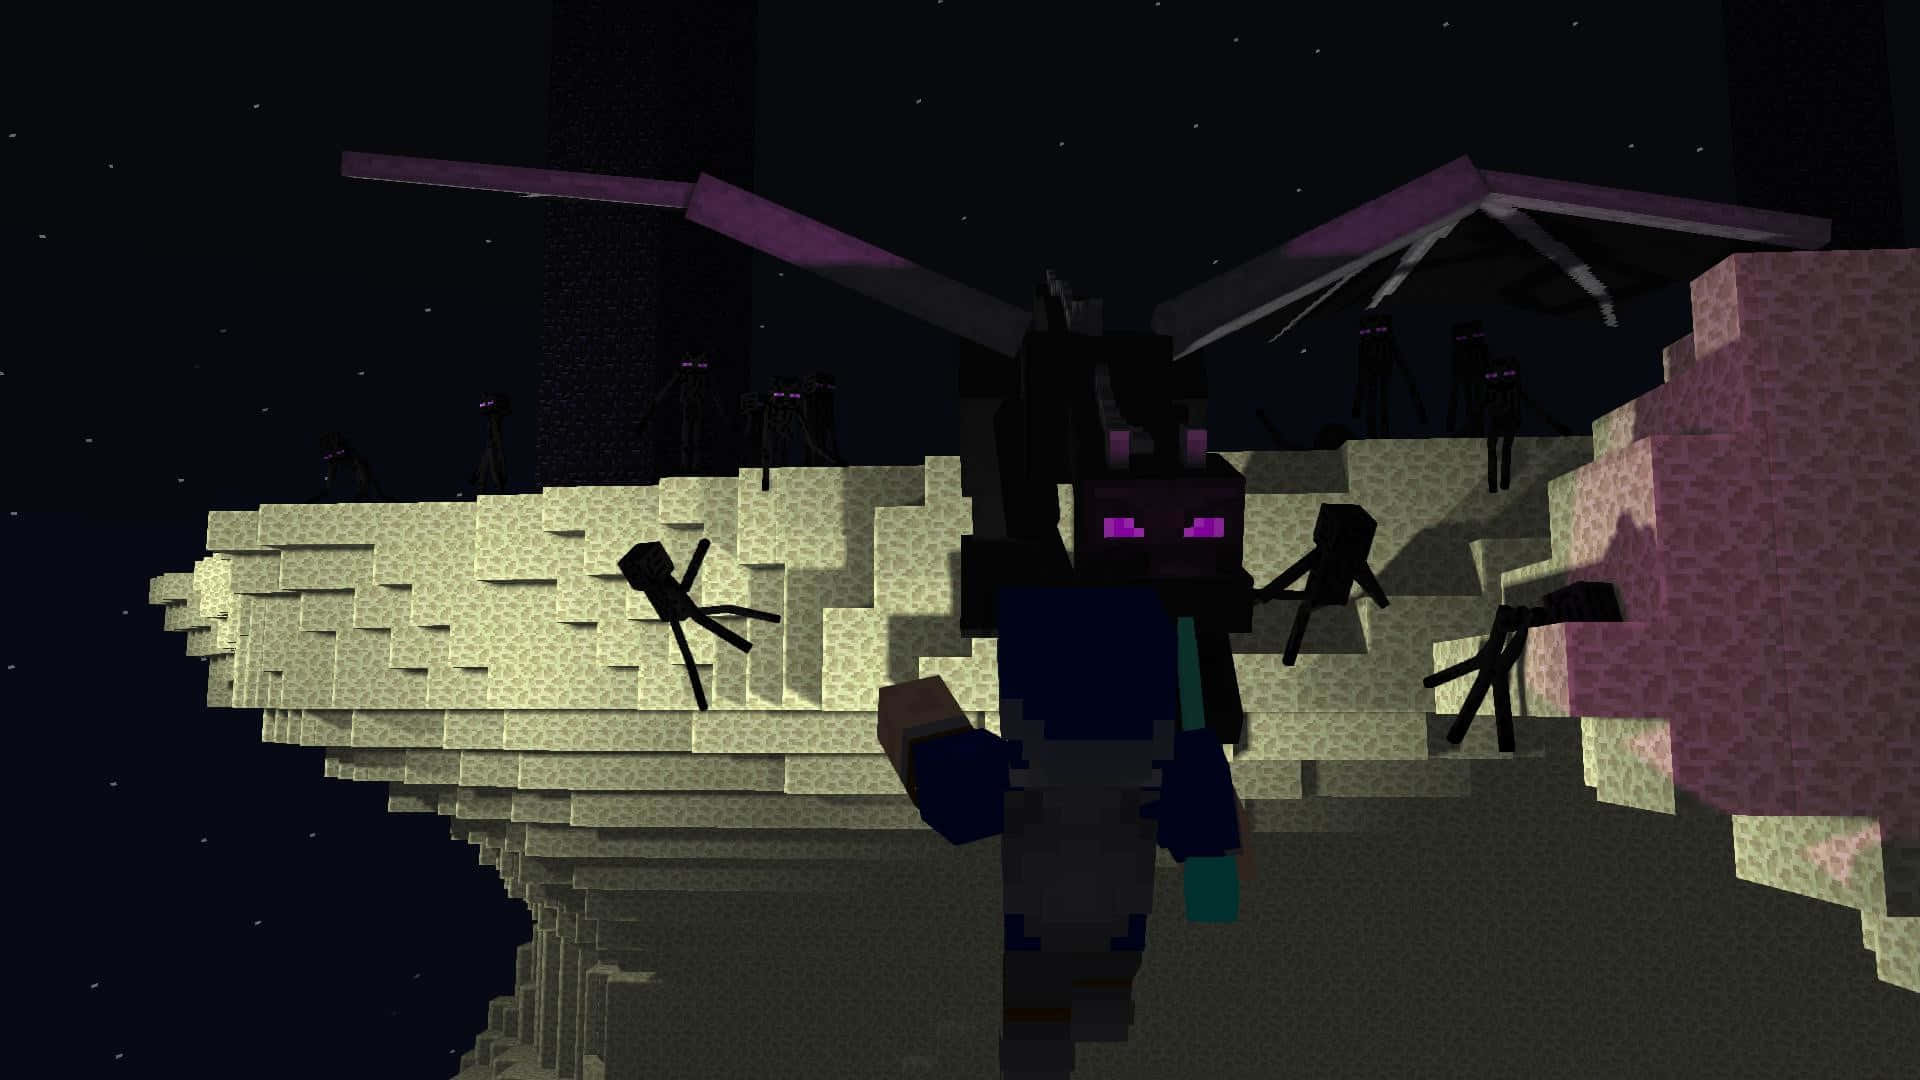 "The Ender Dragon - the Boss of the End in Minecraft"